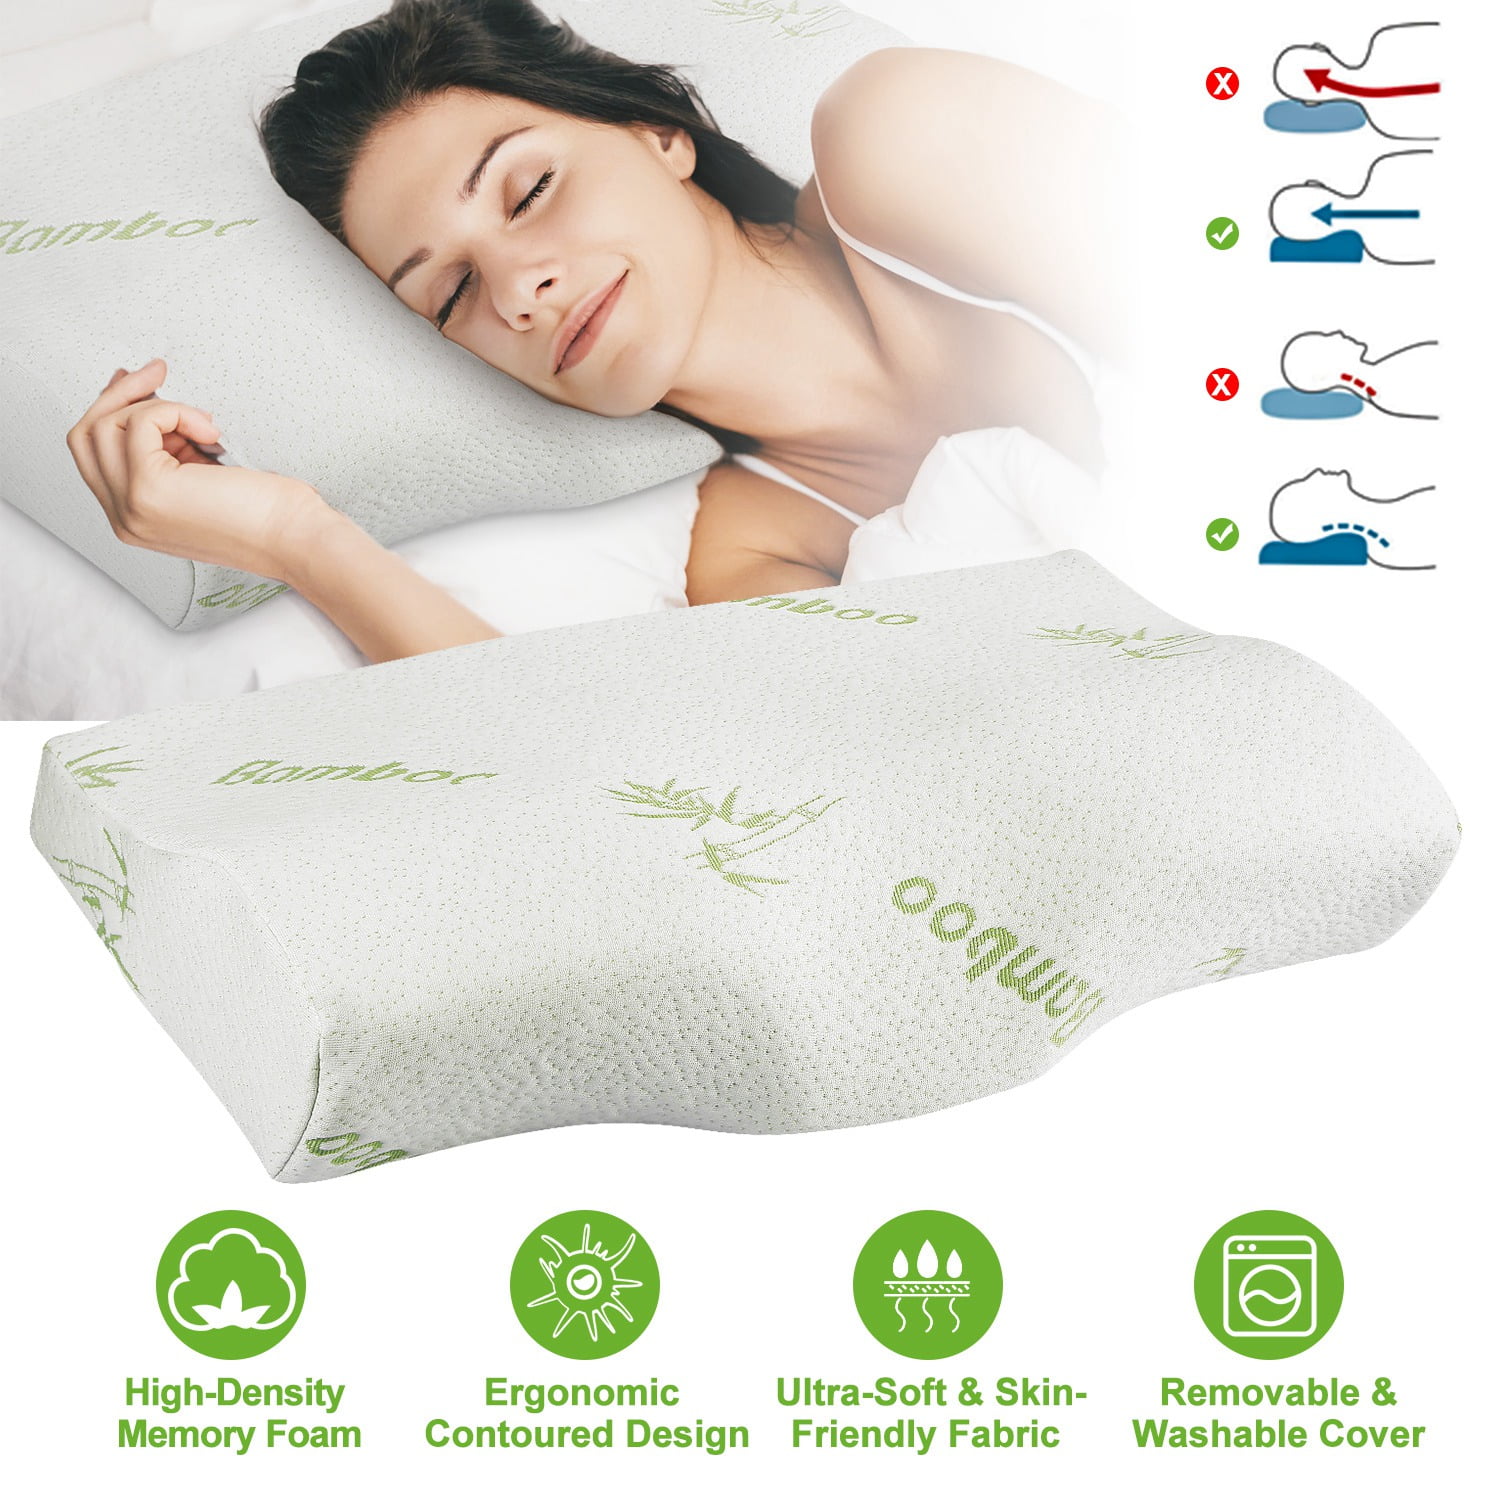 ANTI BACTERIAL BAMBOO MEMORY FOAM PILLOW ORTHOPAEDIC FIRM BACK SUPPORT HEAD NECK